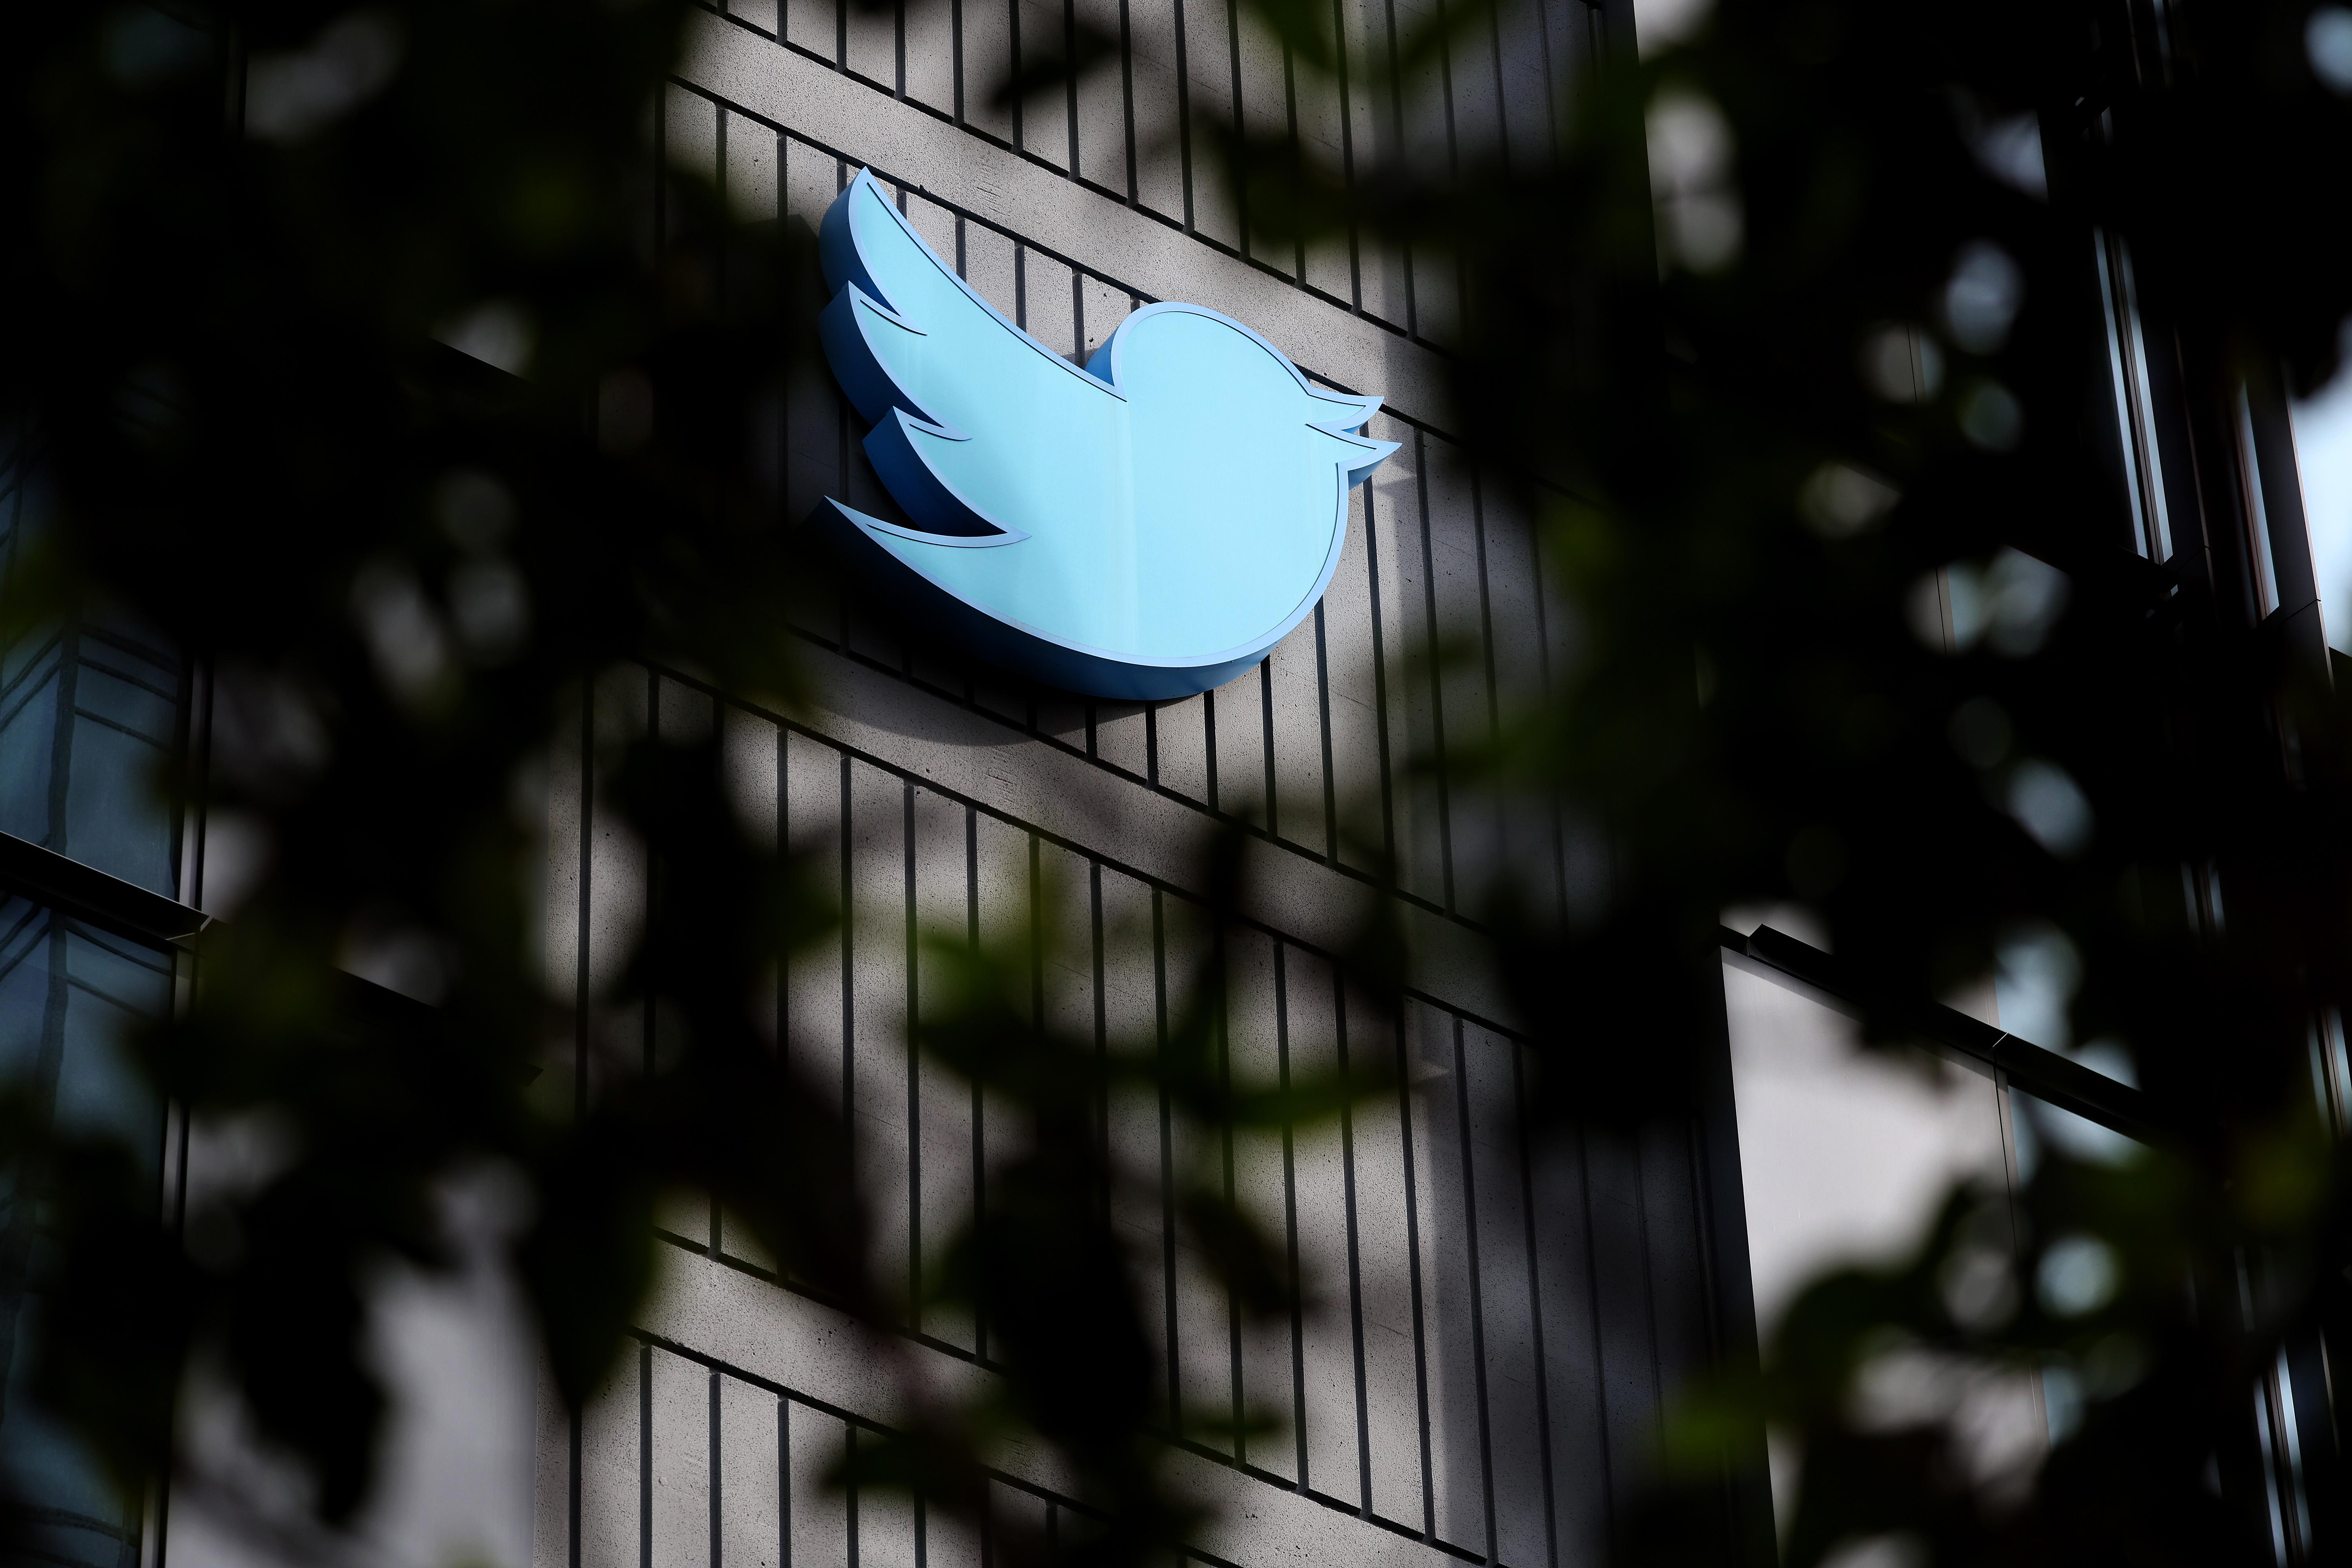 SAN FRANCISCO, CALIFORNIA - OCTOBER 2: The Twitter logo is posted on the exterior of Twitter headquarters on October 28, 2022 in San Francisco, California. Elon Musk closed the deal to purchase social media platform Twitter for $44 billion and has already fired several top executives. (Photo by Justin Sullivan/Getty Images)